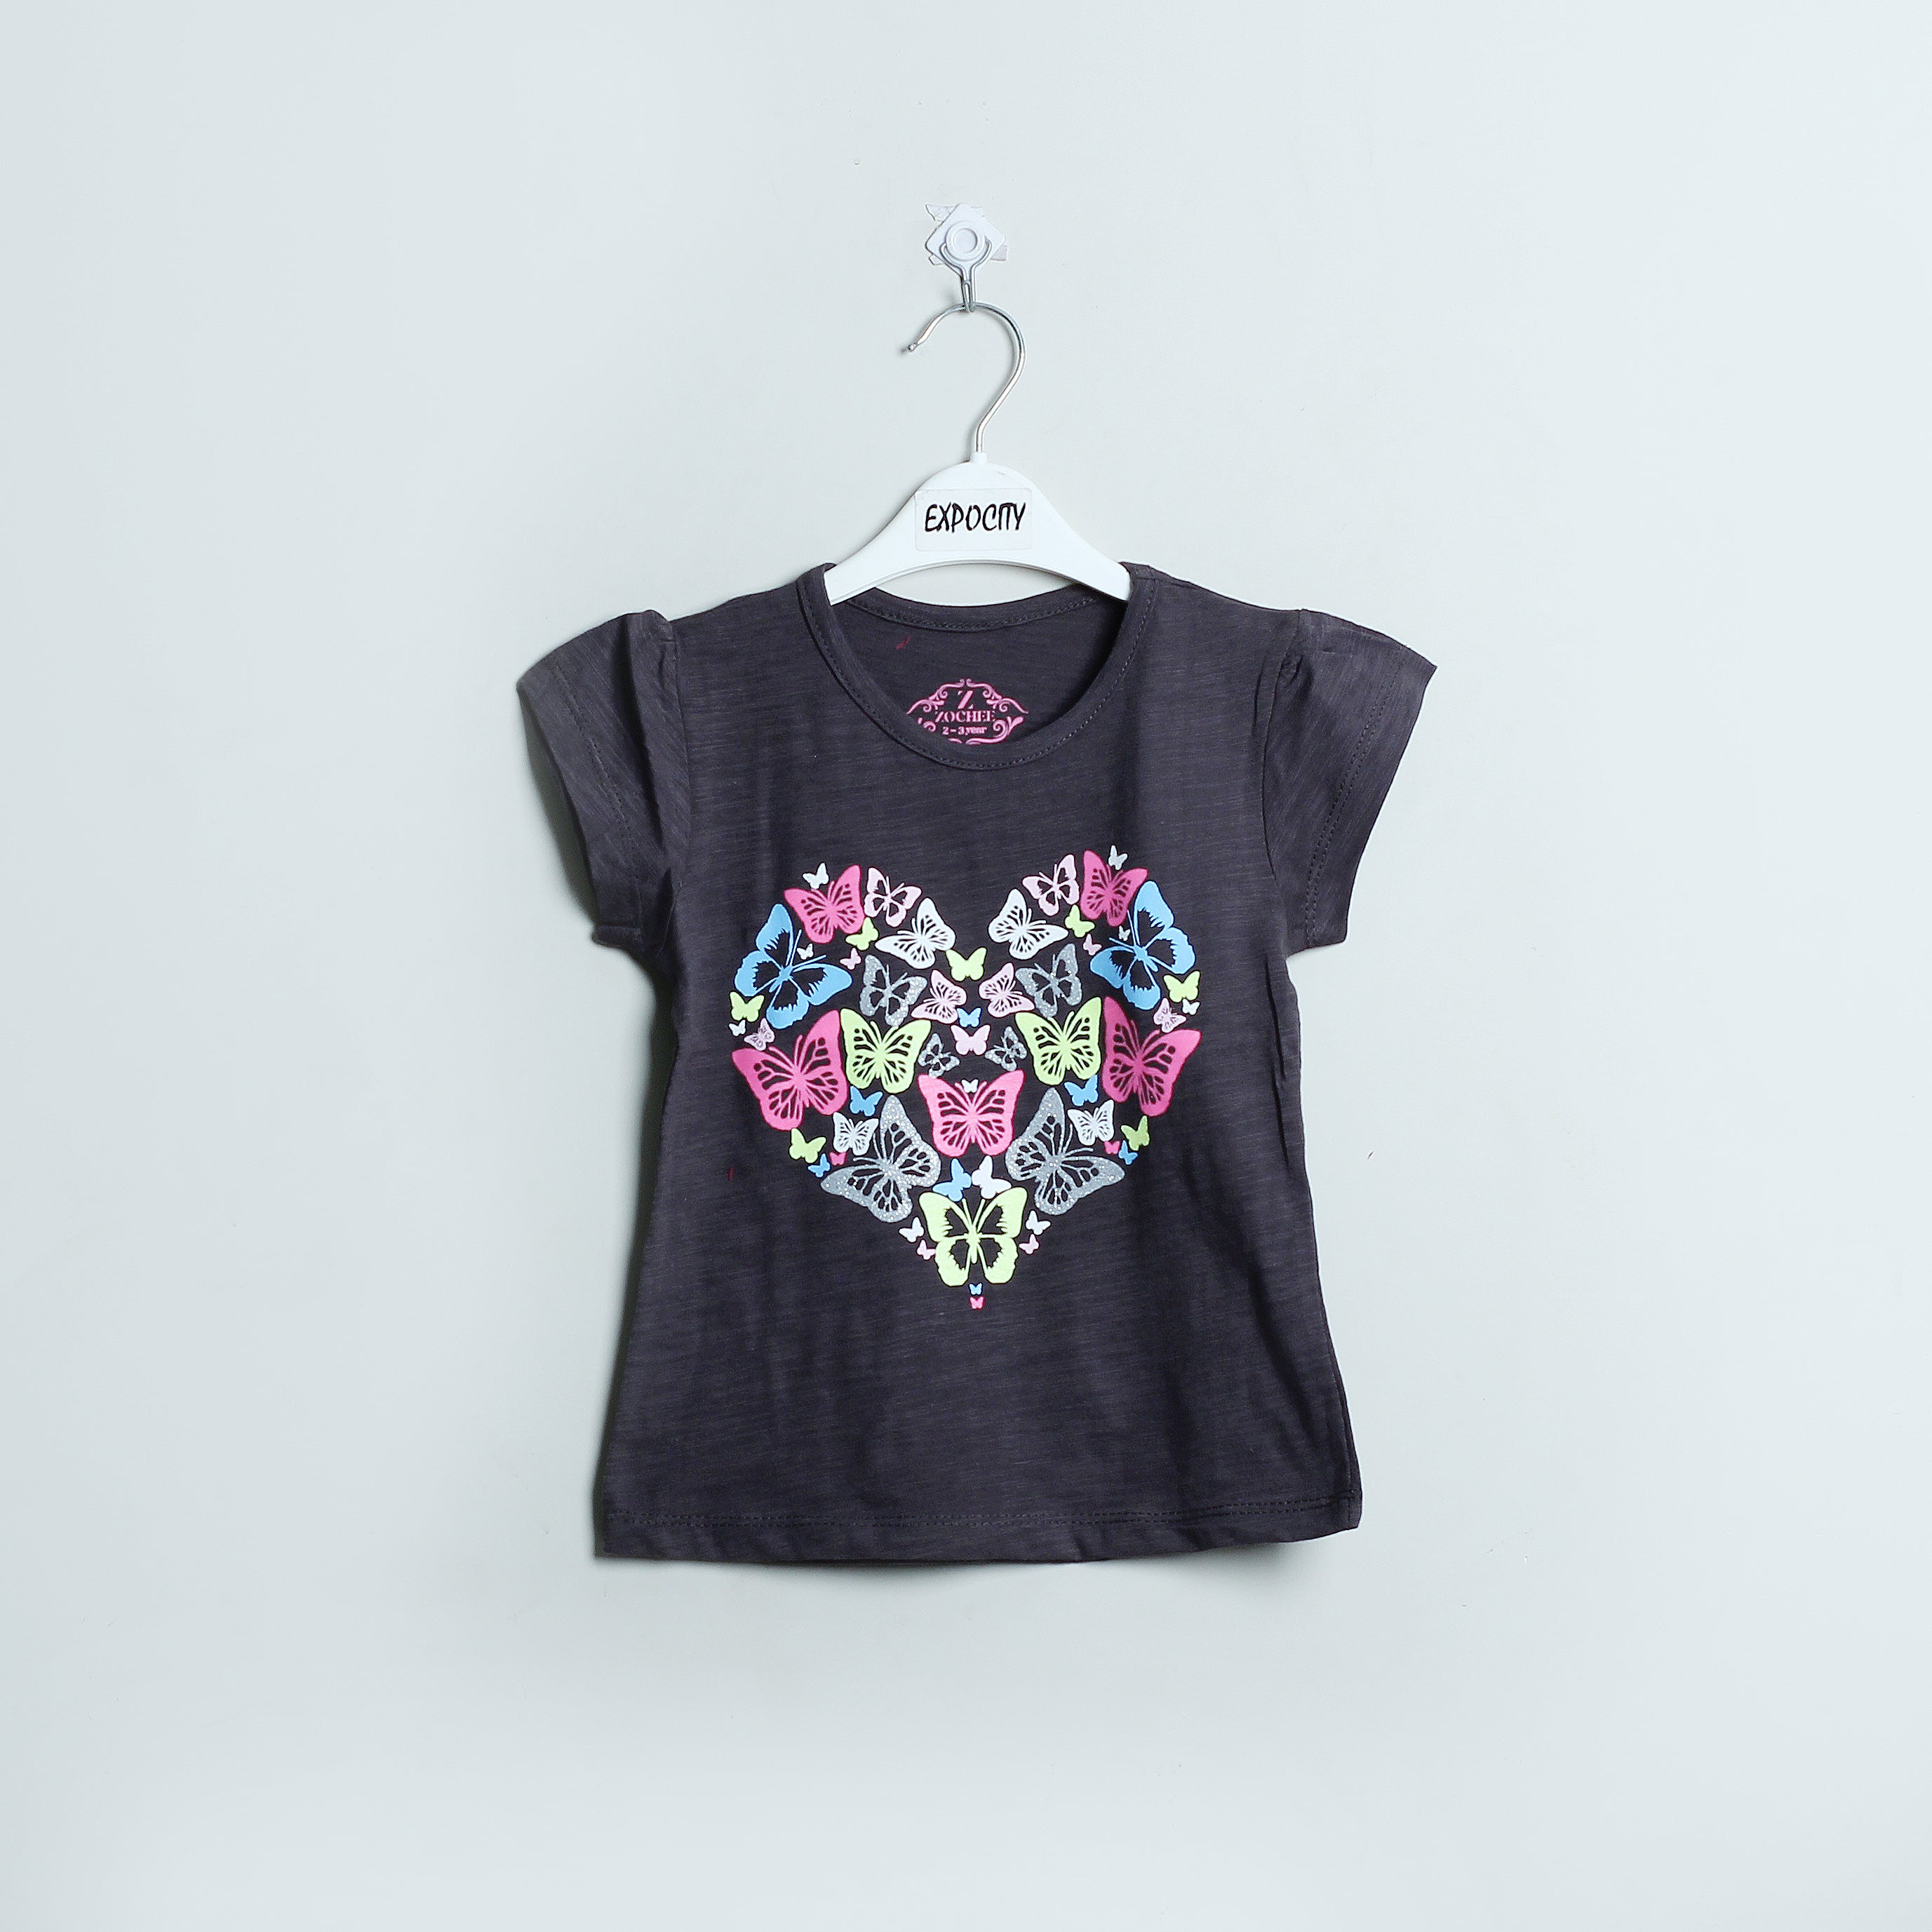 Brown Butterfly Printed T-Shirt - Expo City